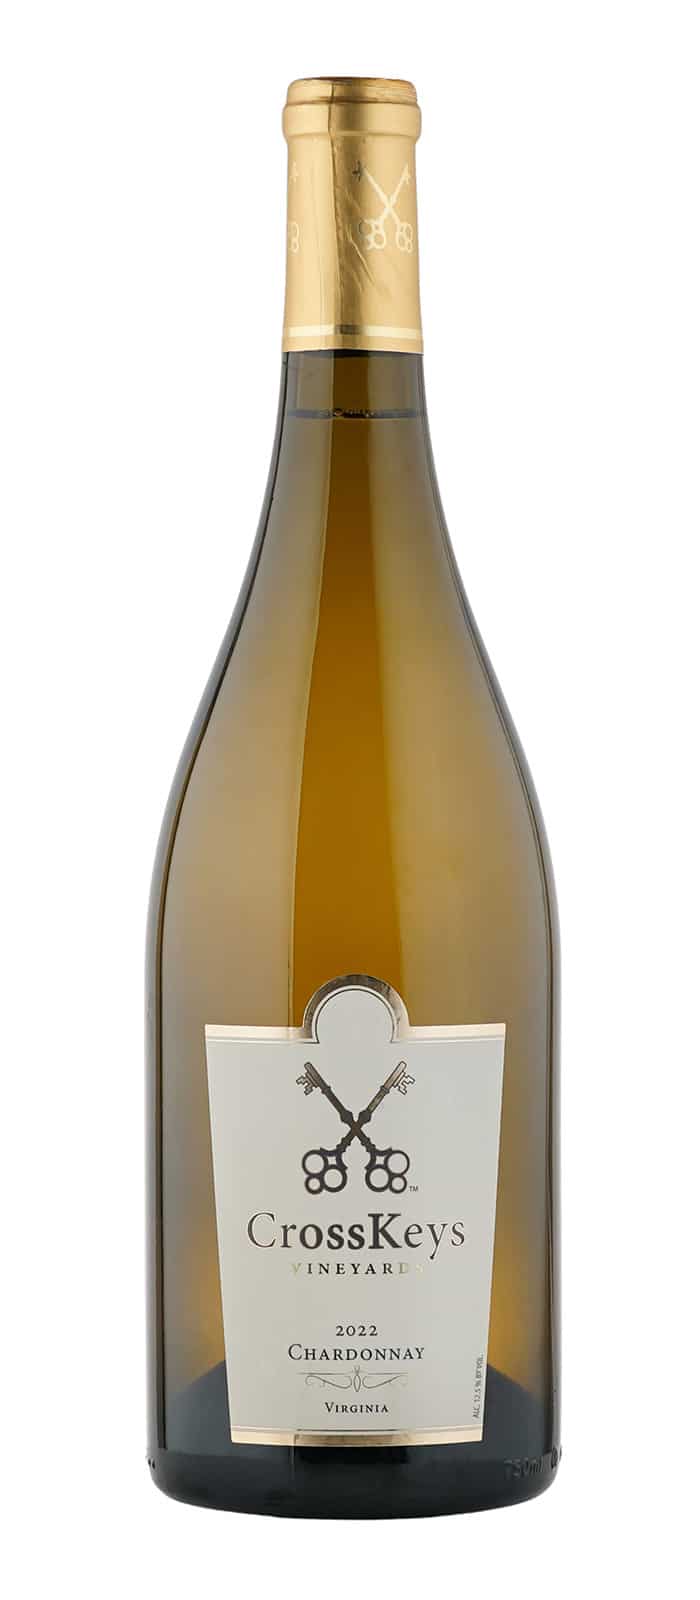 Bottle of CrossKeys Vineyards 2022 Chardonnay, Gold Medal, Virginia Governor's Cup Wine Competition.